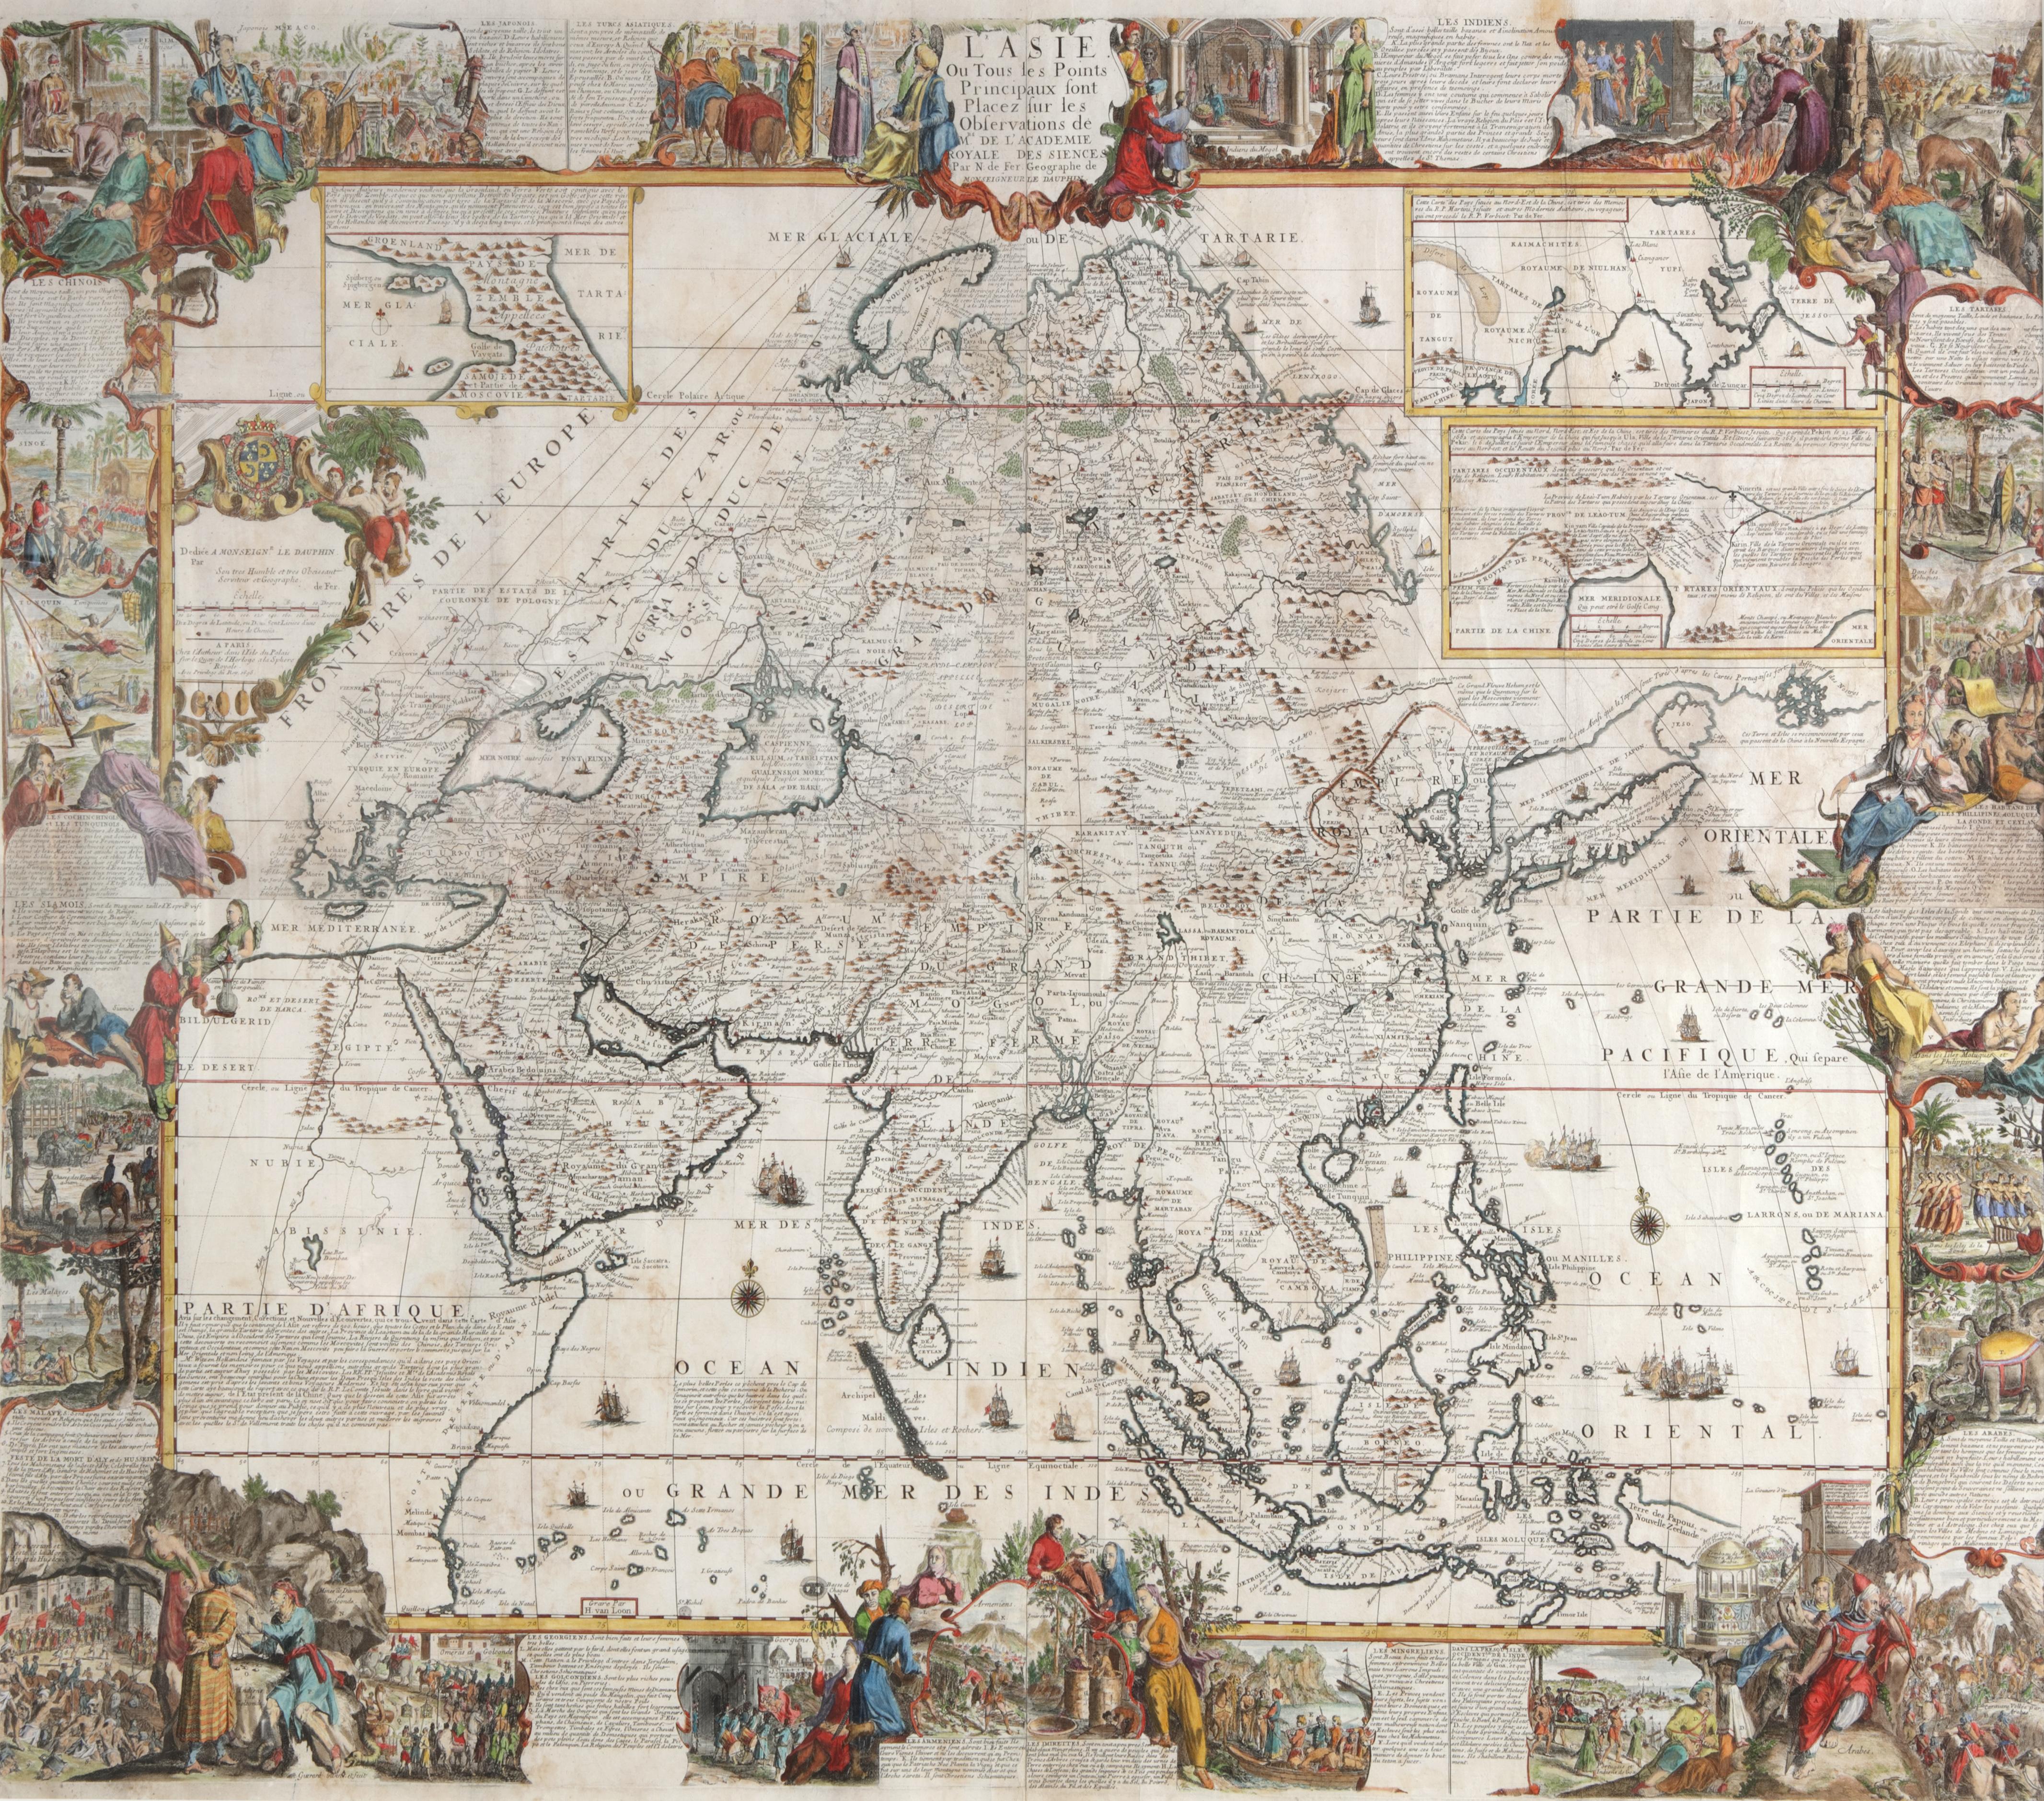 Important giant Map of Asia, for the King of France, 1696 - Print by Nicolas de Fer